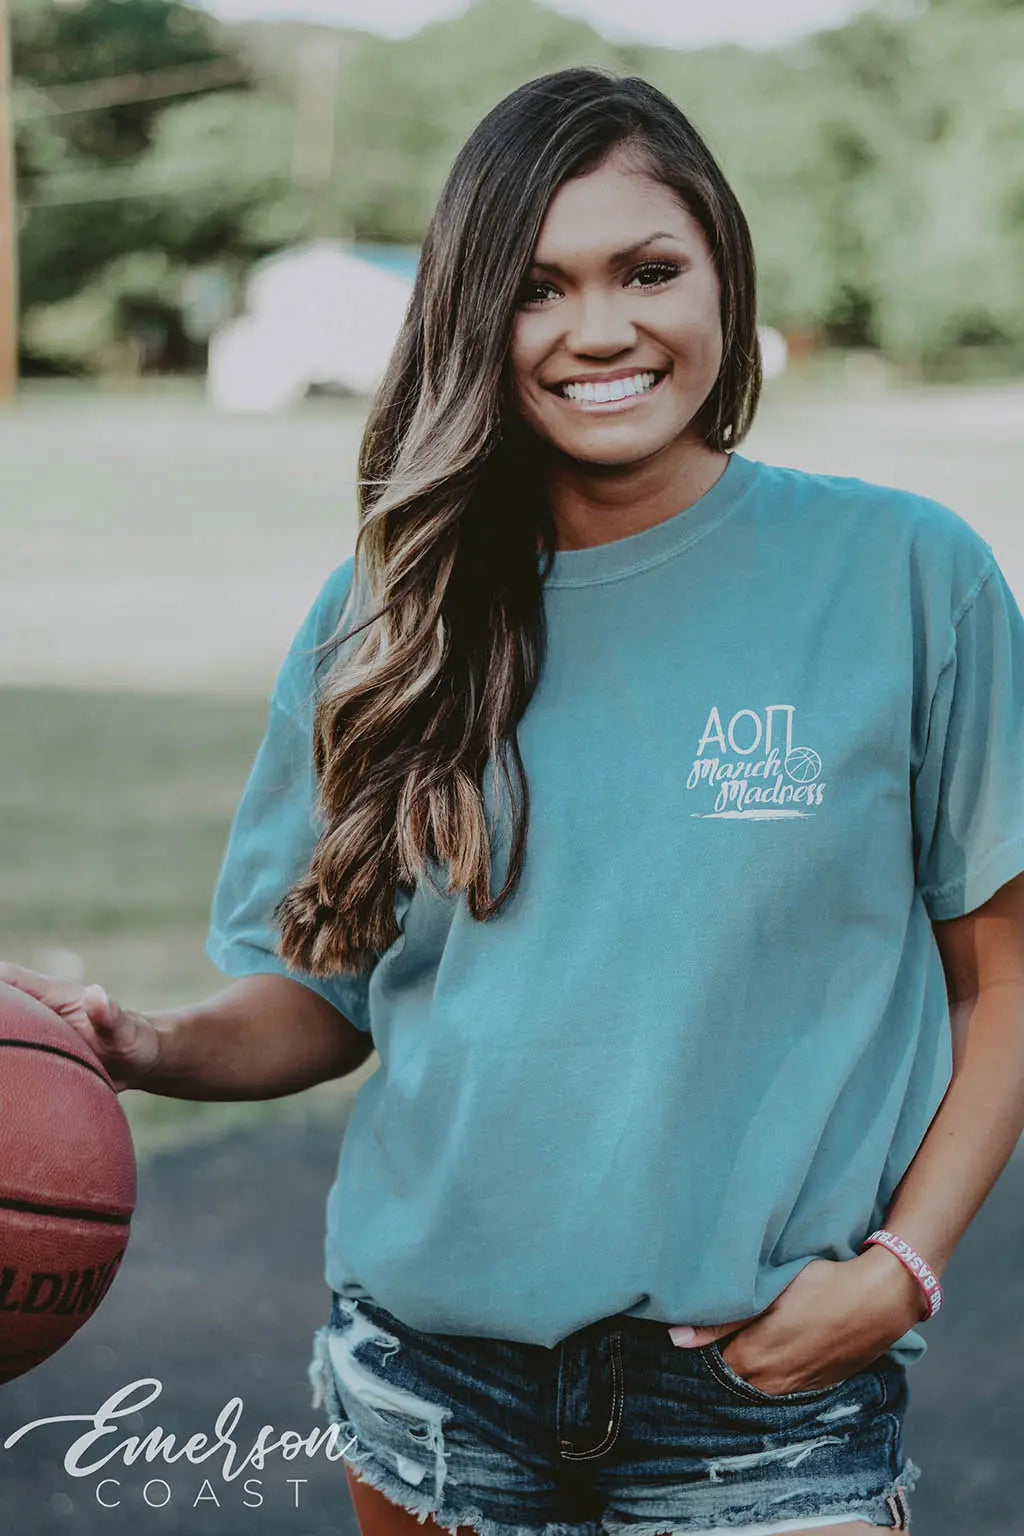 AOII March Madness T-shirt